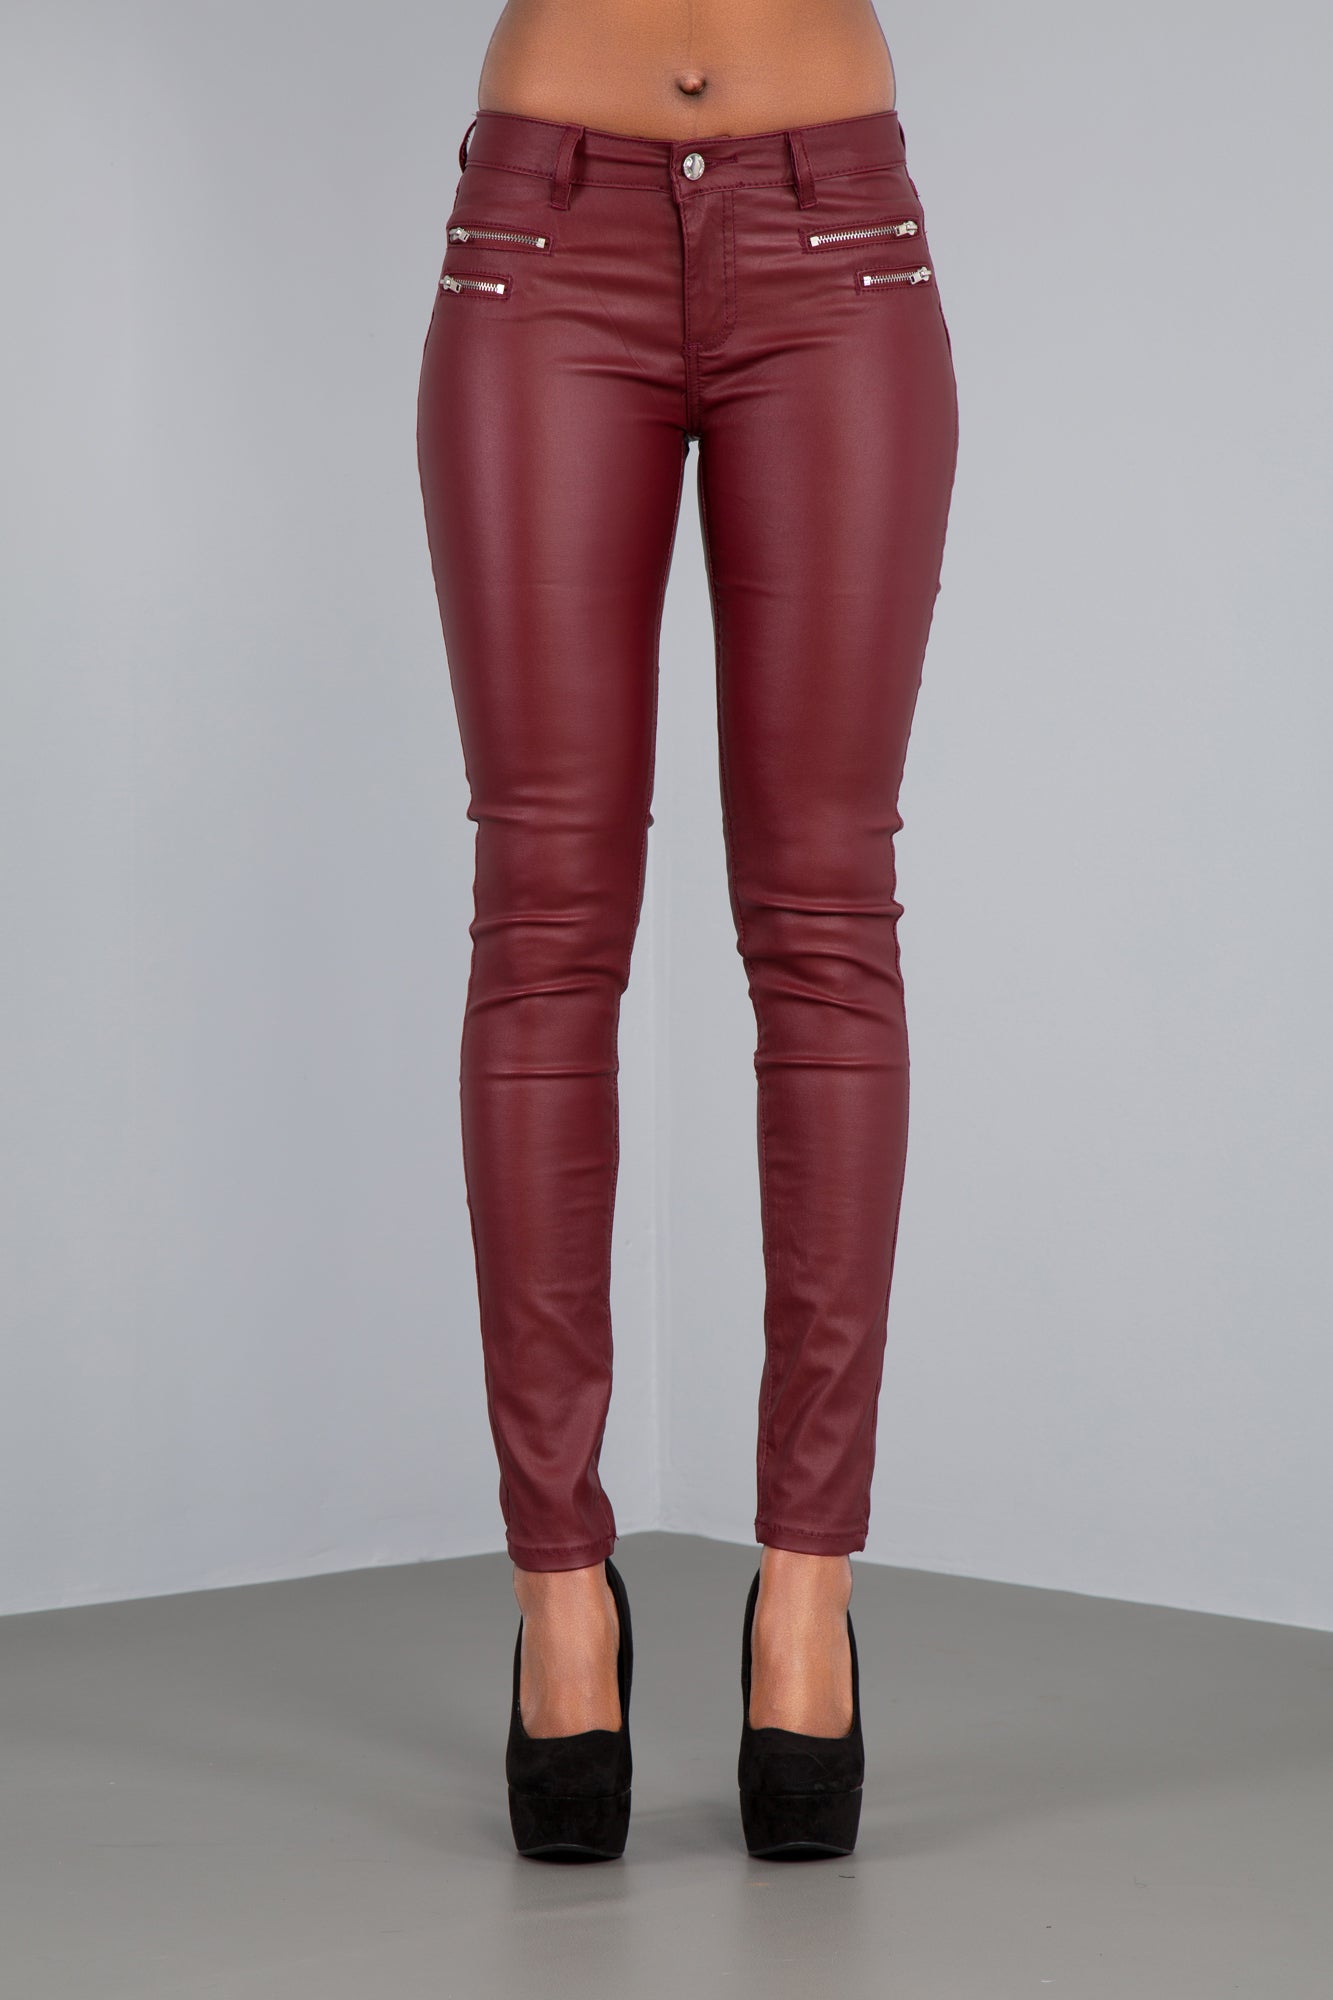 Figured It Out Faux Leather Pants  Burgundy  24  Faux leather pants Leather  pants Leather pant